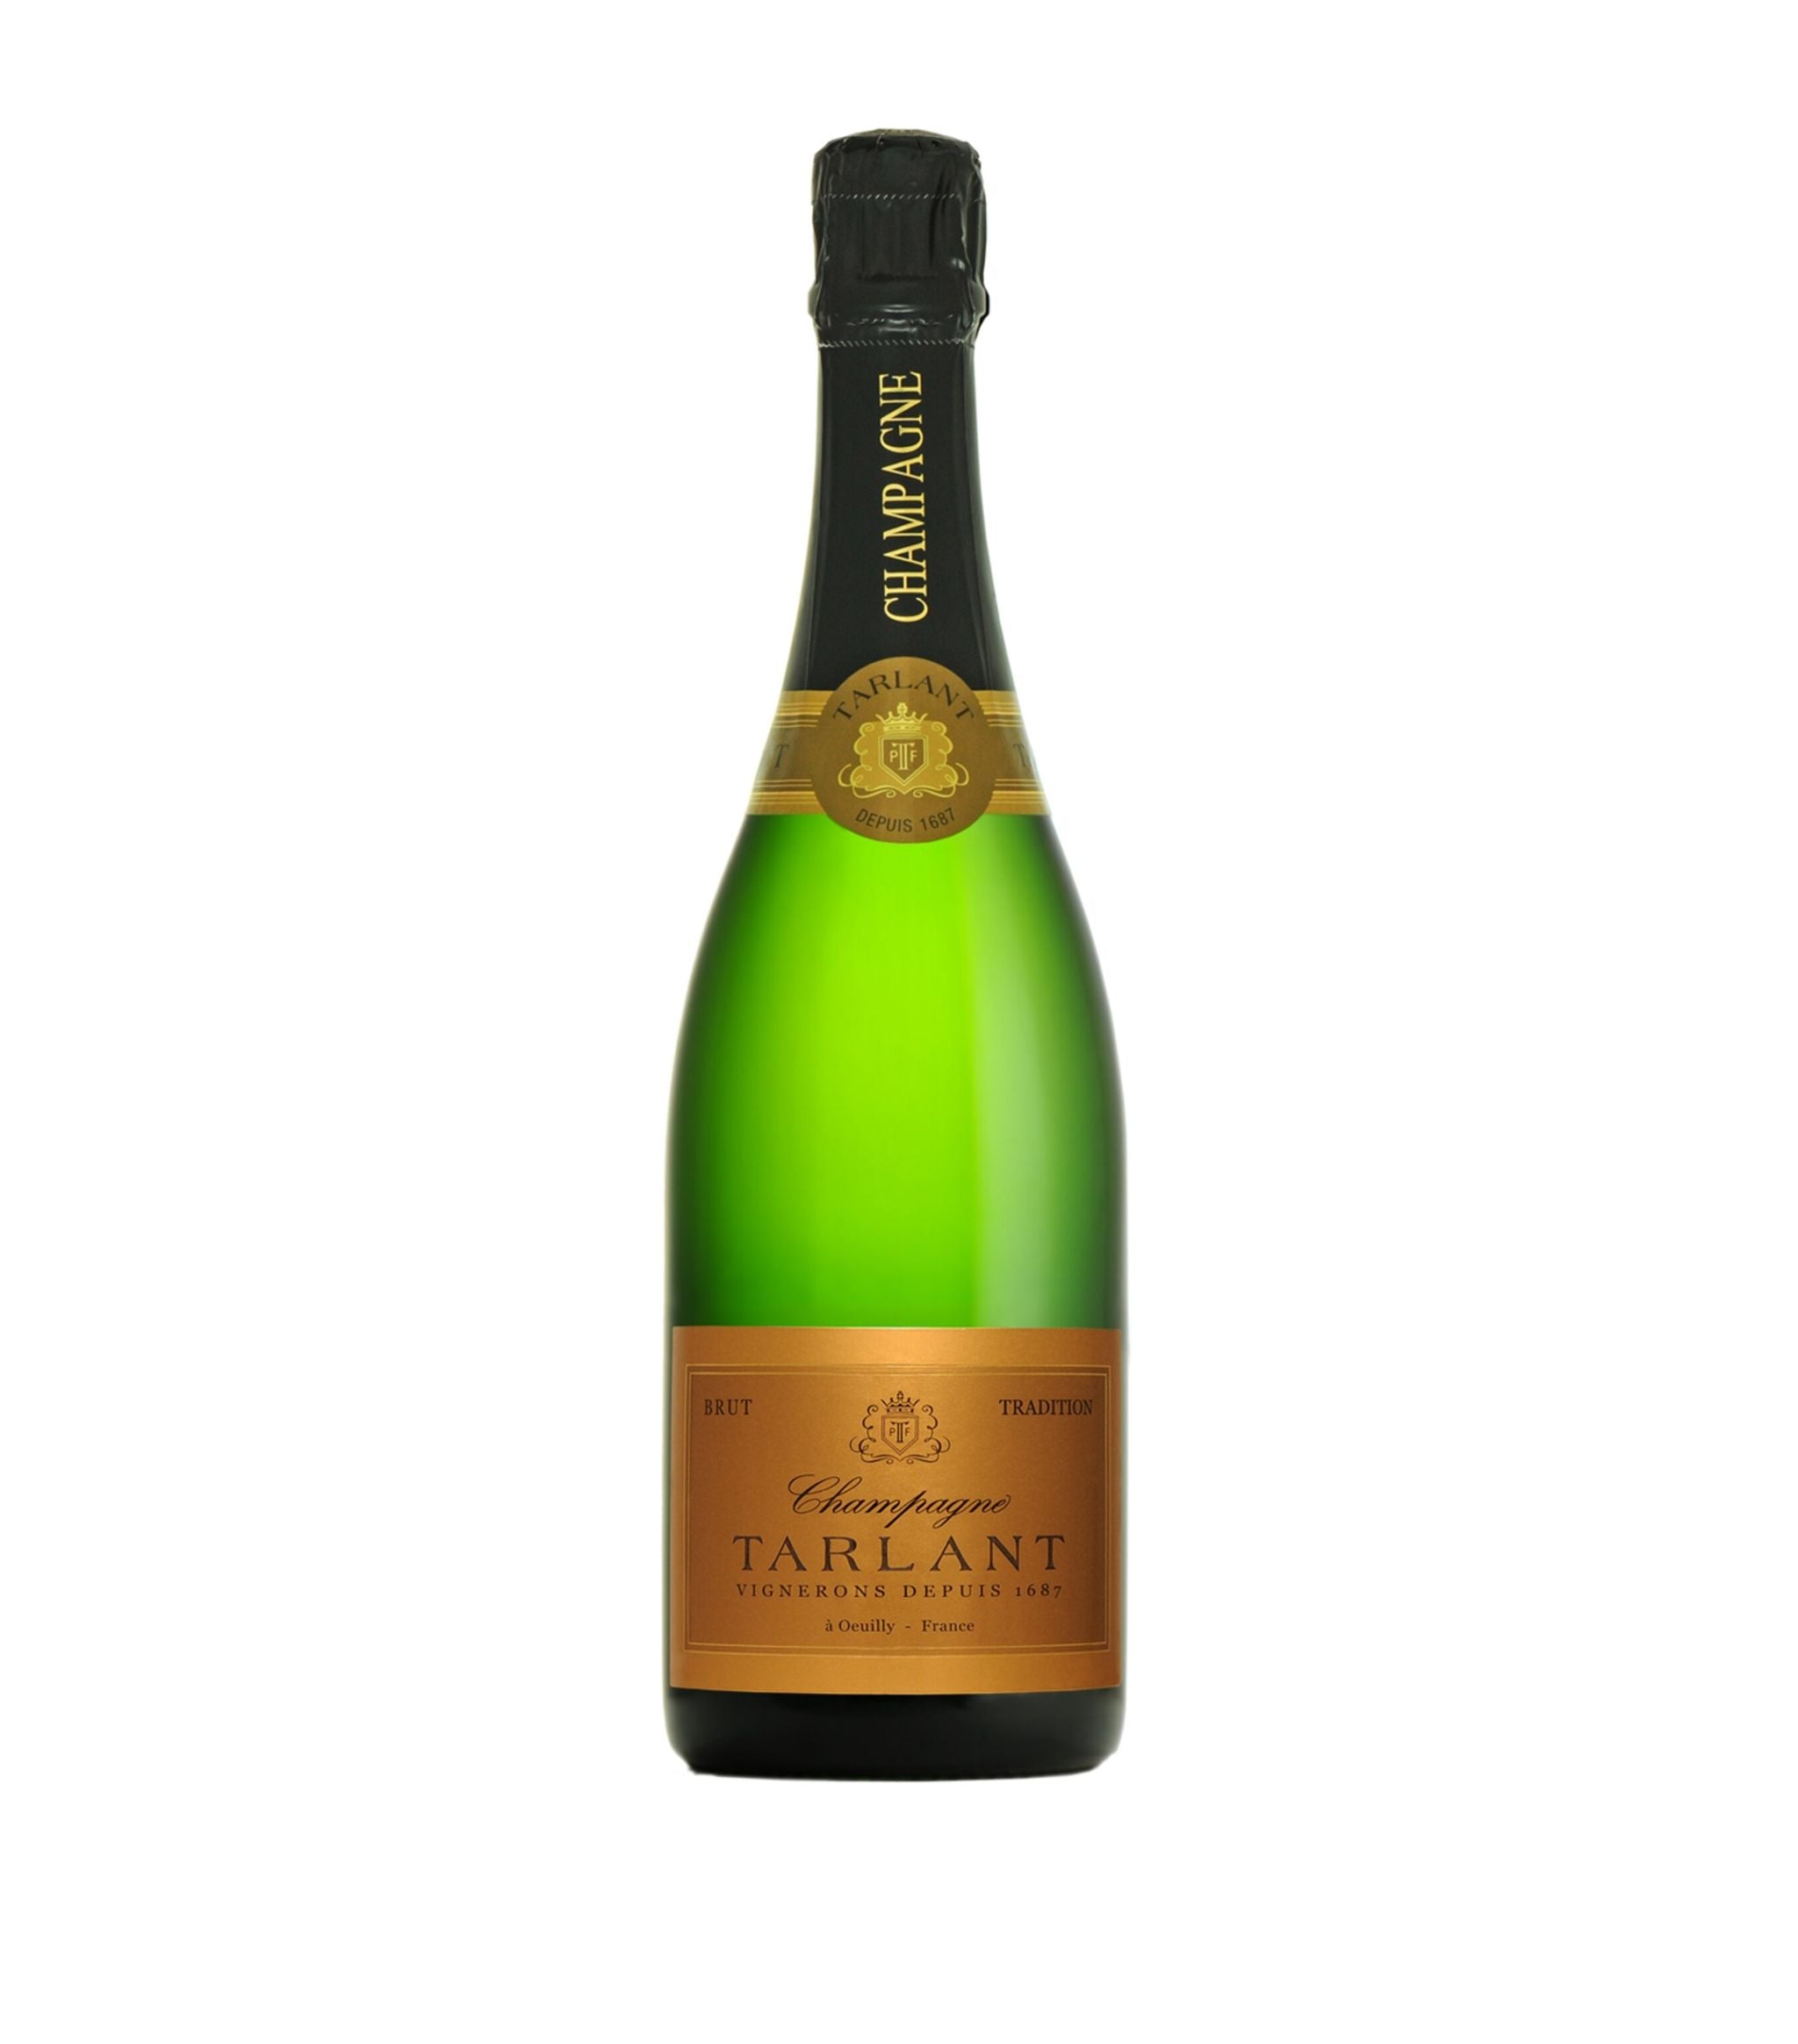 Tarlant Tradition Brut NV (75cl) Wine & Champagne Harrods   